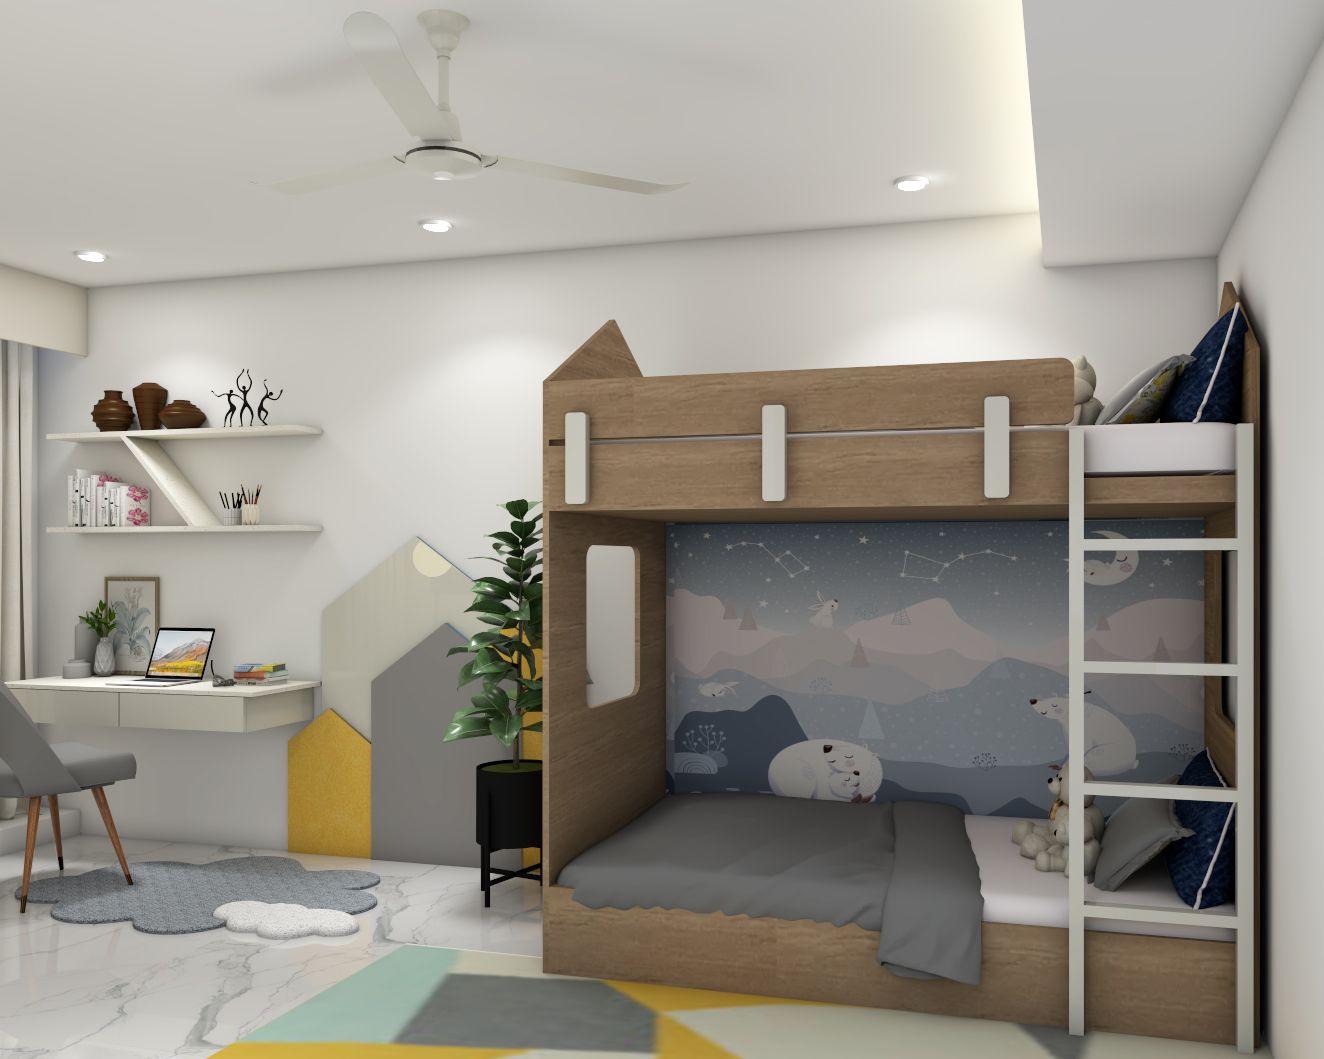 Modern Boys Room Design With Wooden Bunk Bed